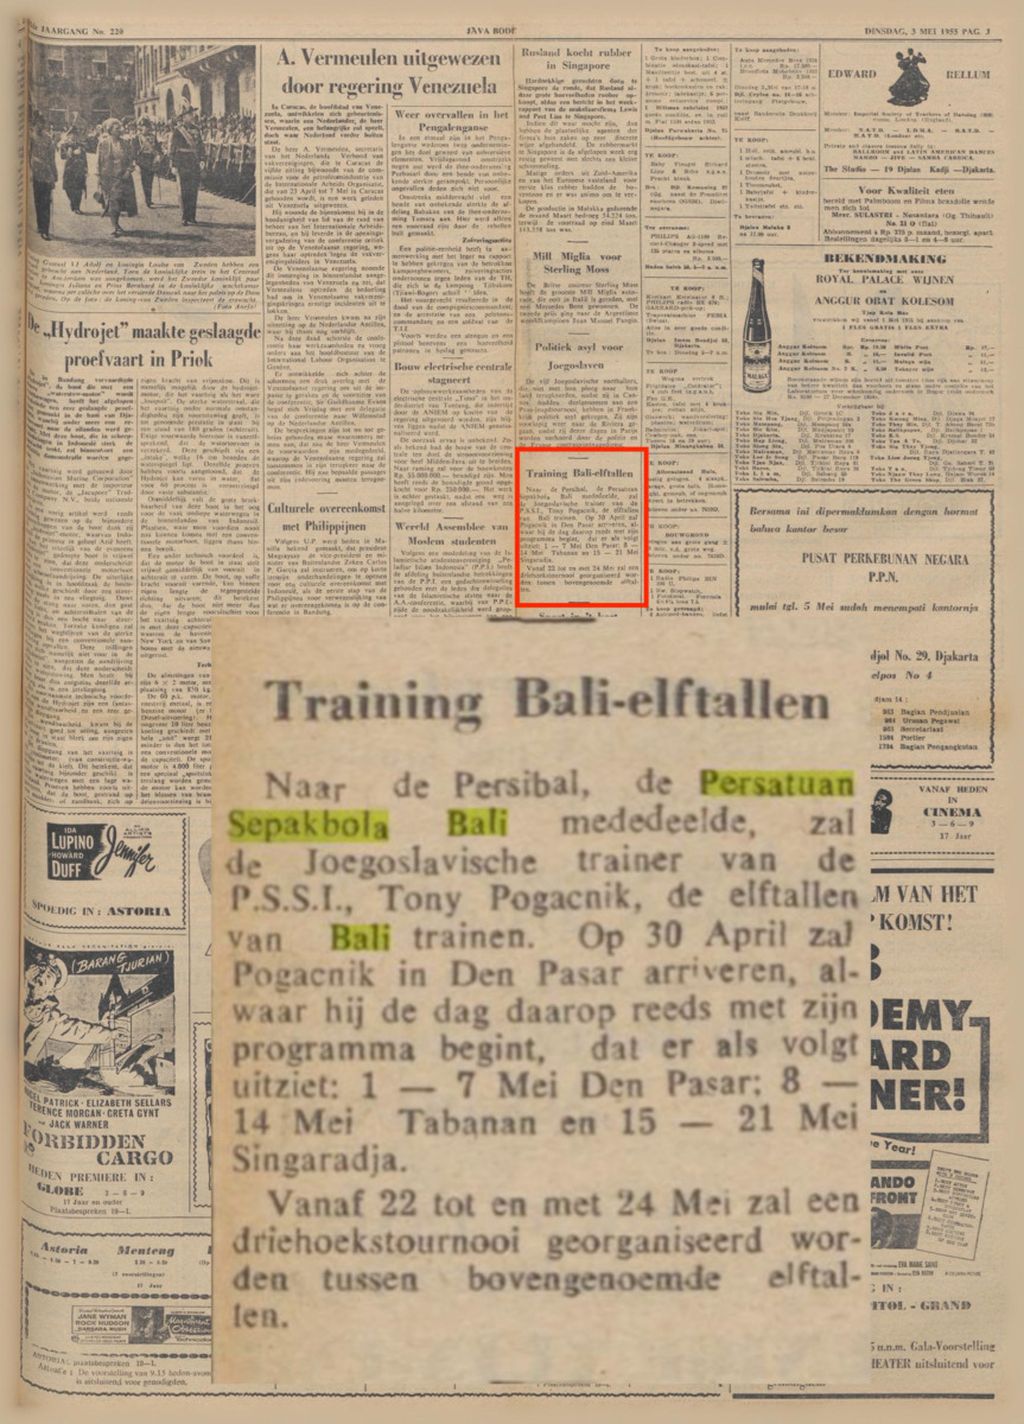 View of page three of the Dutch language newspaper, <i>Java-bode</i>, edition of 3 May 1955, regarding the activities of the Indonesian National Team Coach in the 1950s, Tony Pogacnik, who provided football training in Bali.